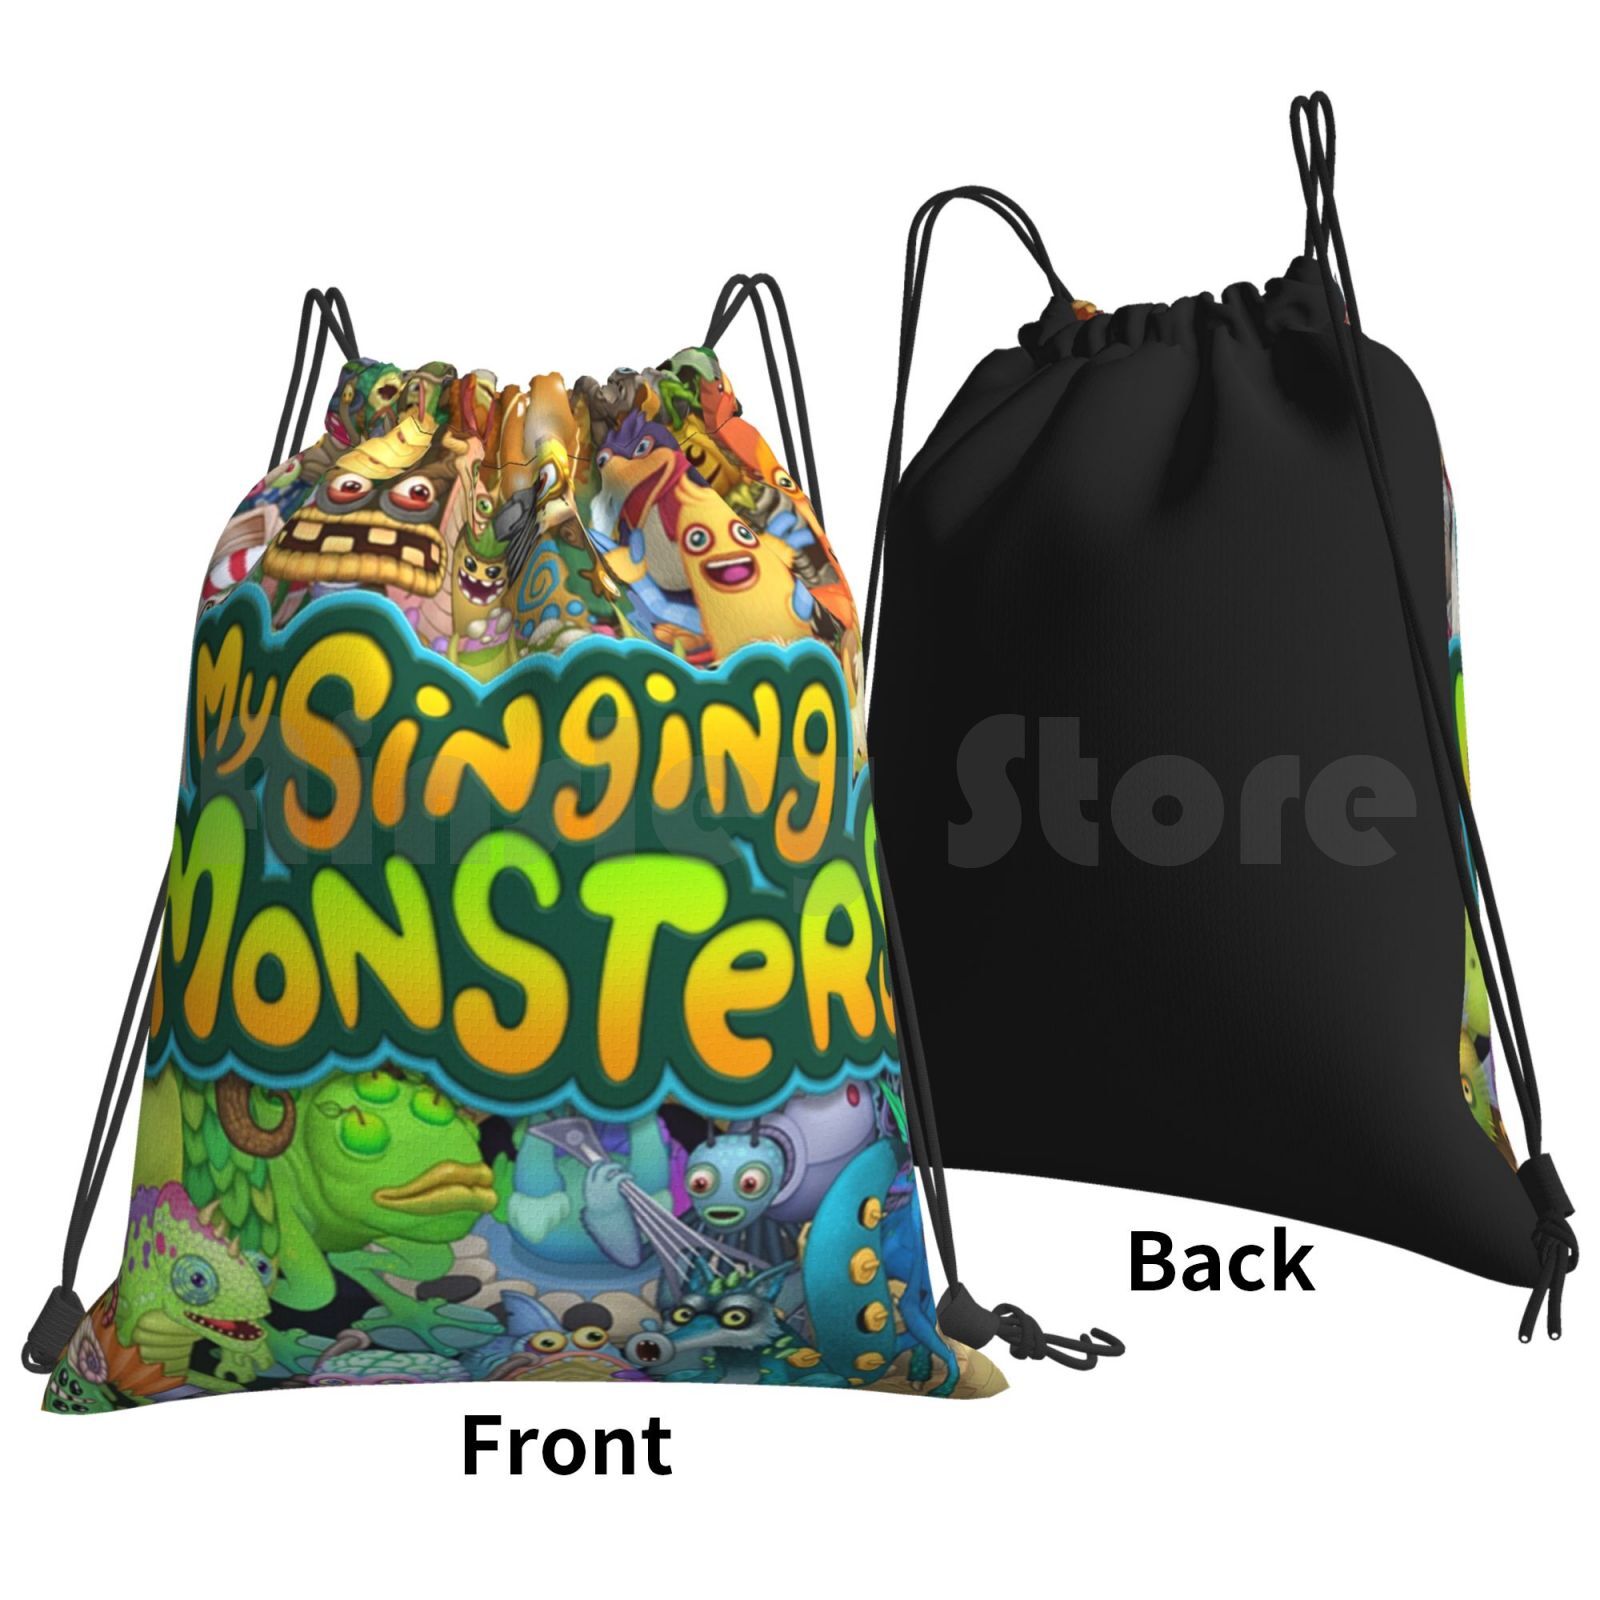 My Singing Monsters Characters And Title Backpack Drawstring Bag Riding Climbing Gym Bag My Singing Monsters 1 - My Singing Monsters Plush